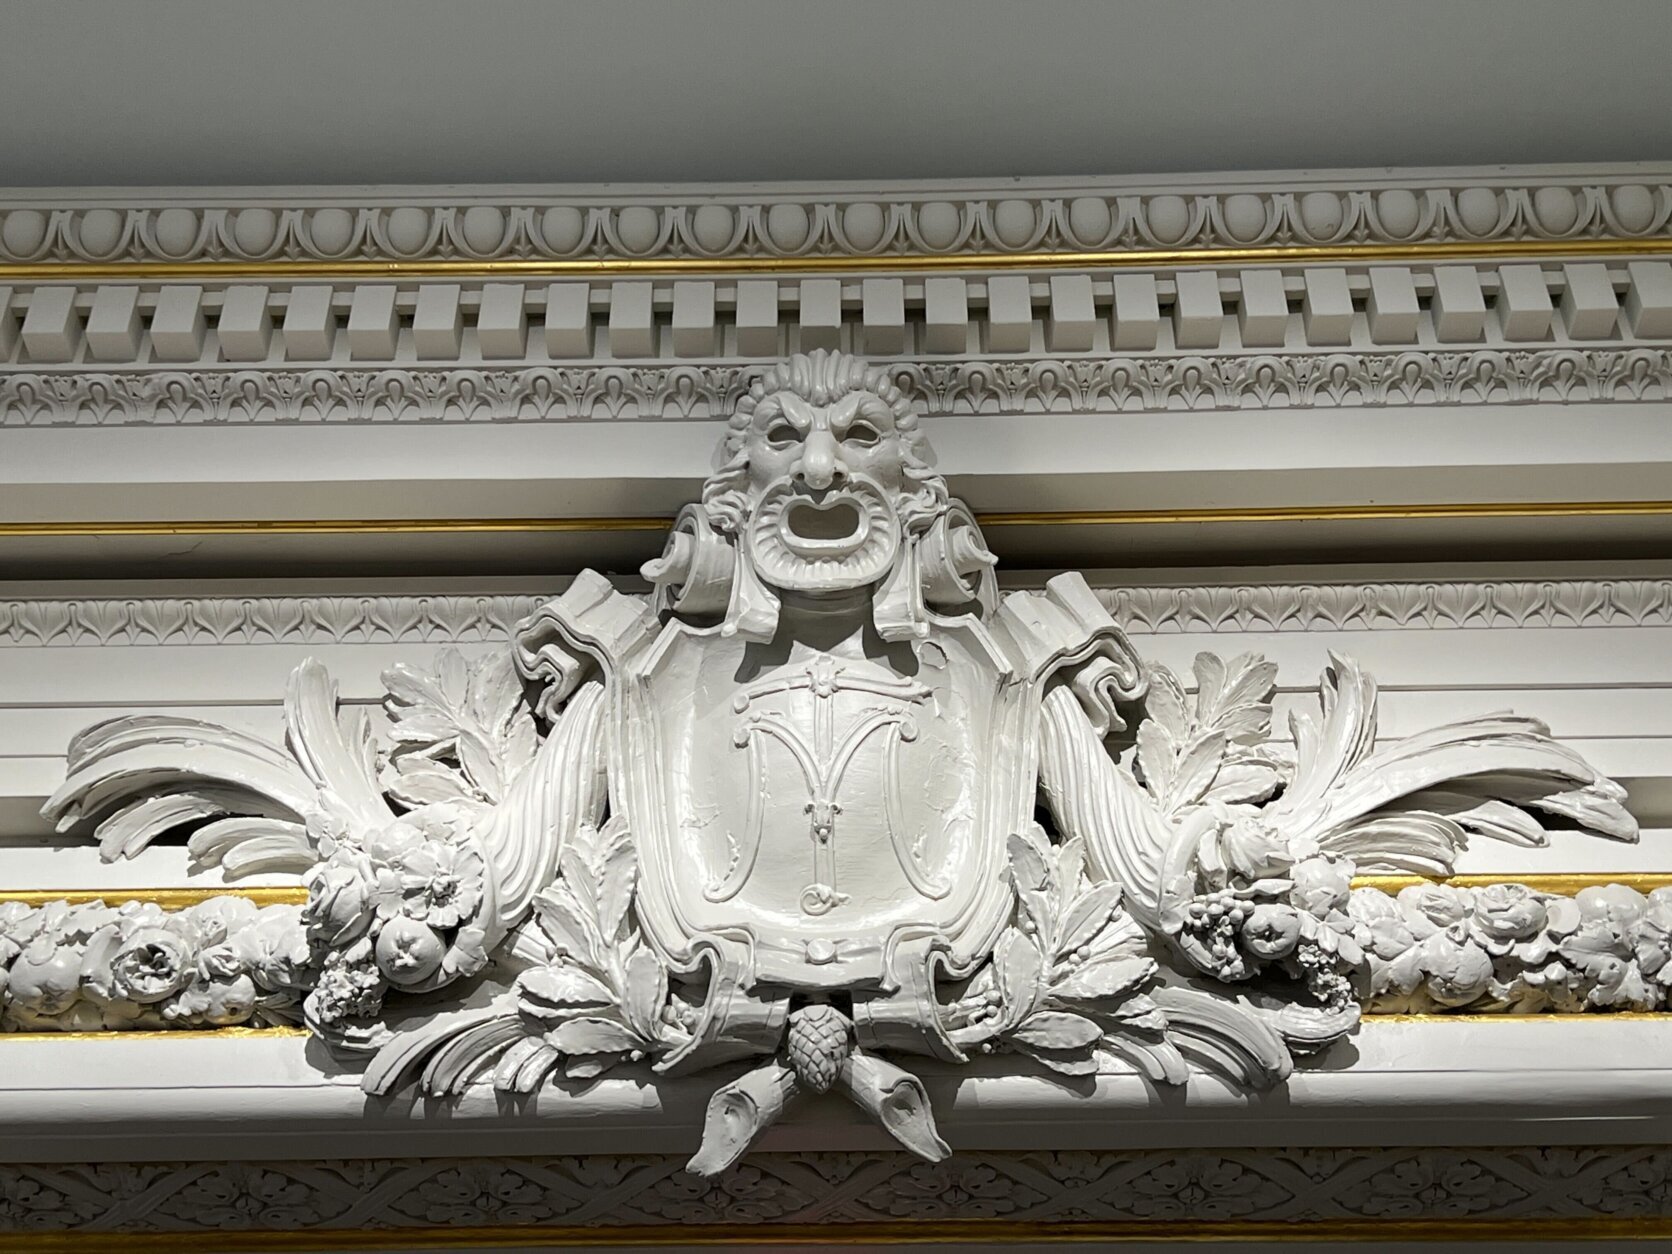 Molding inside the great hall showcases a figure with a shield.